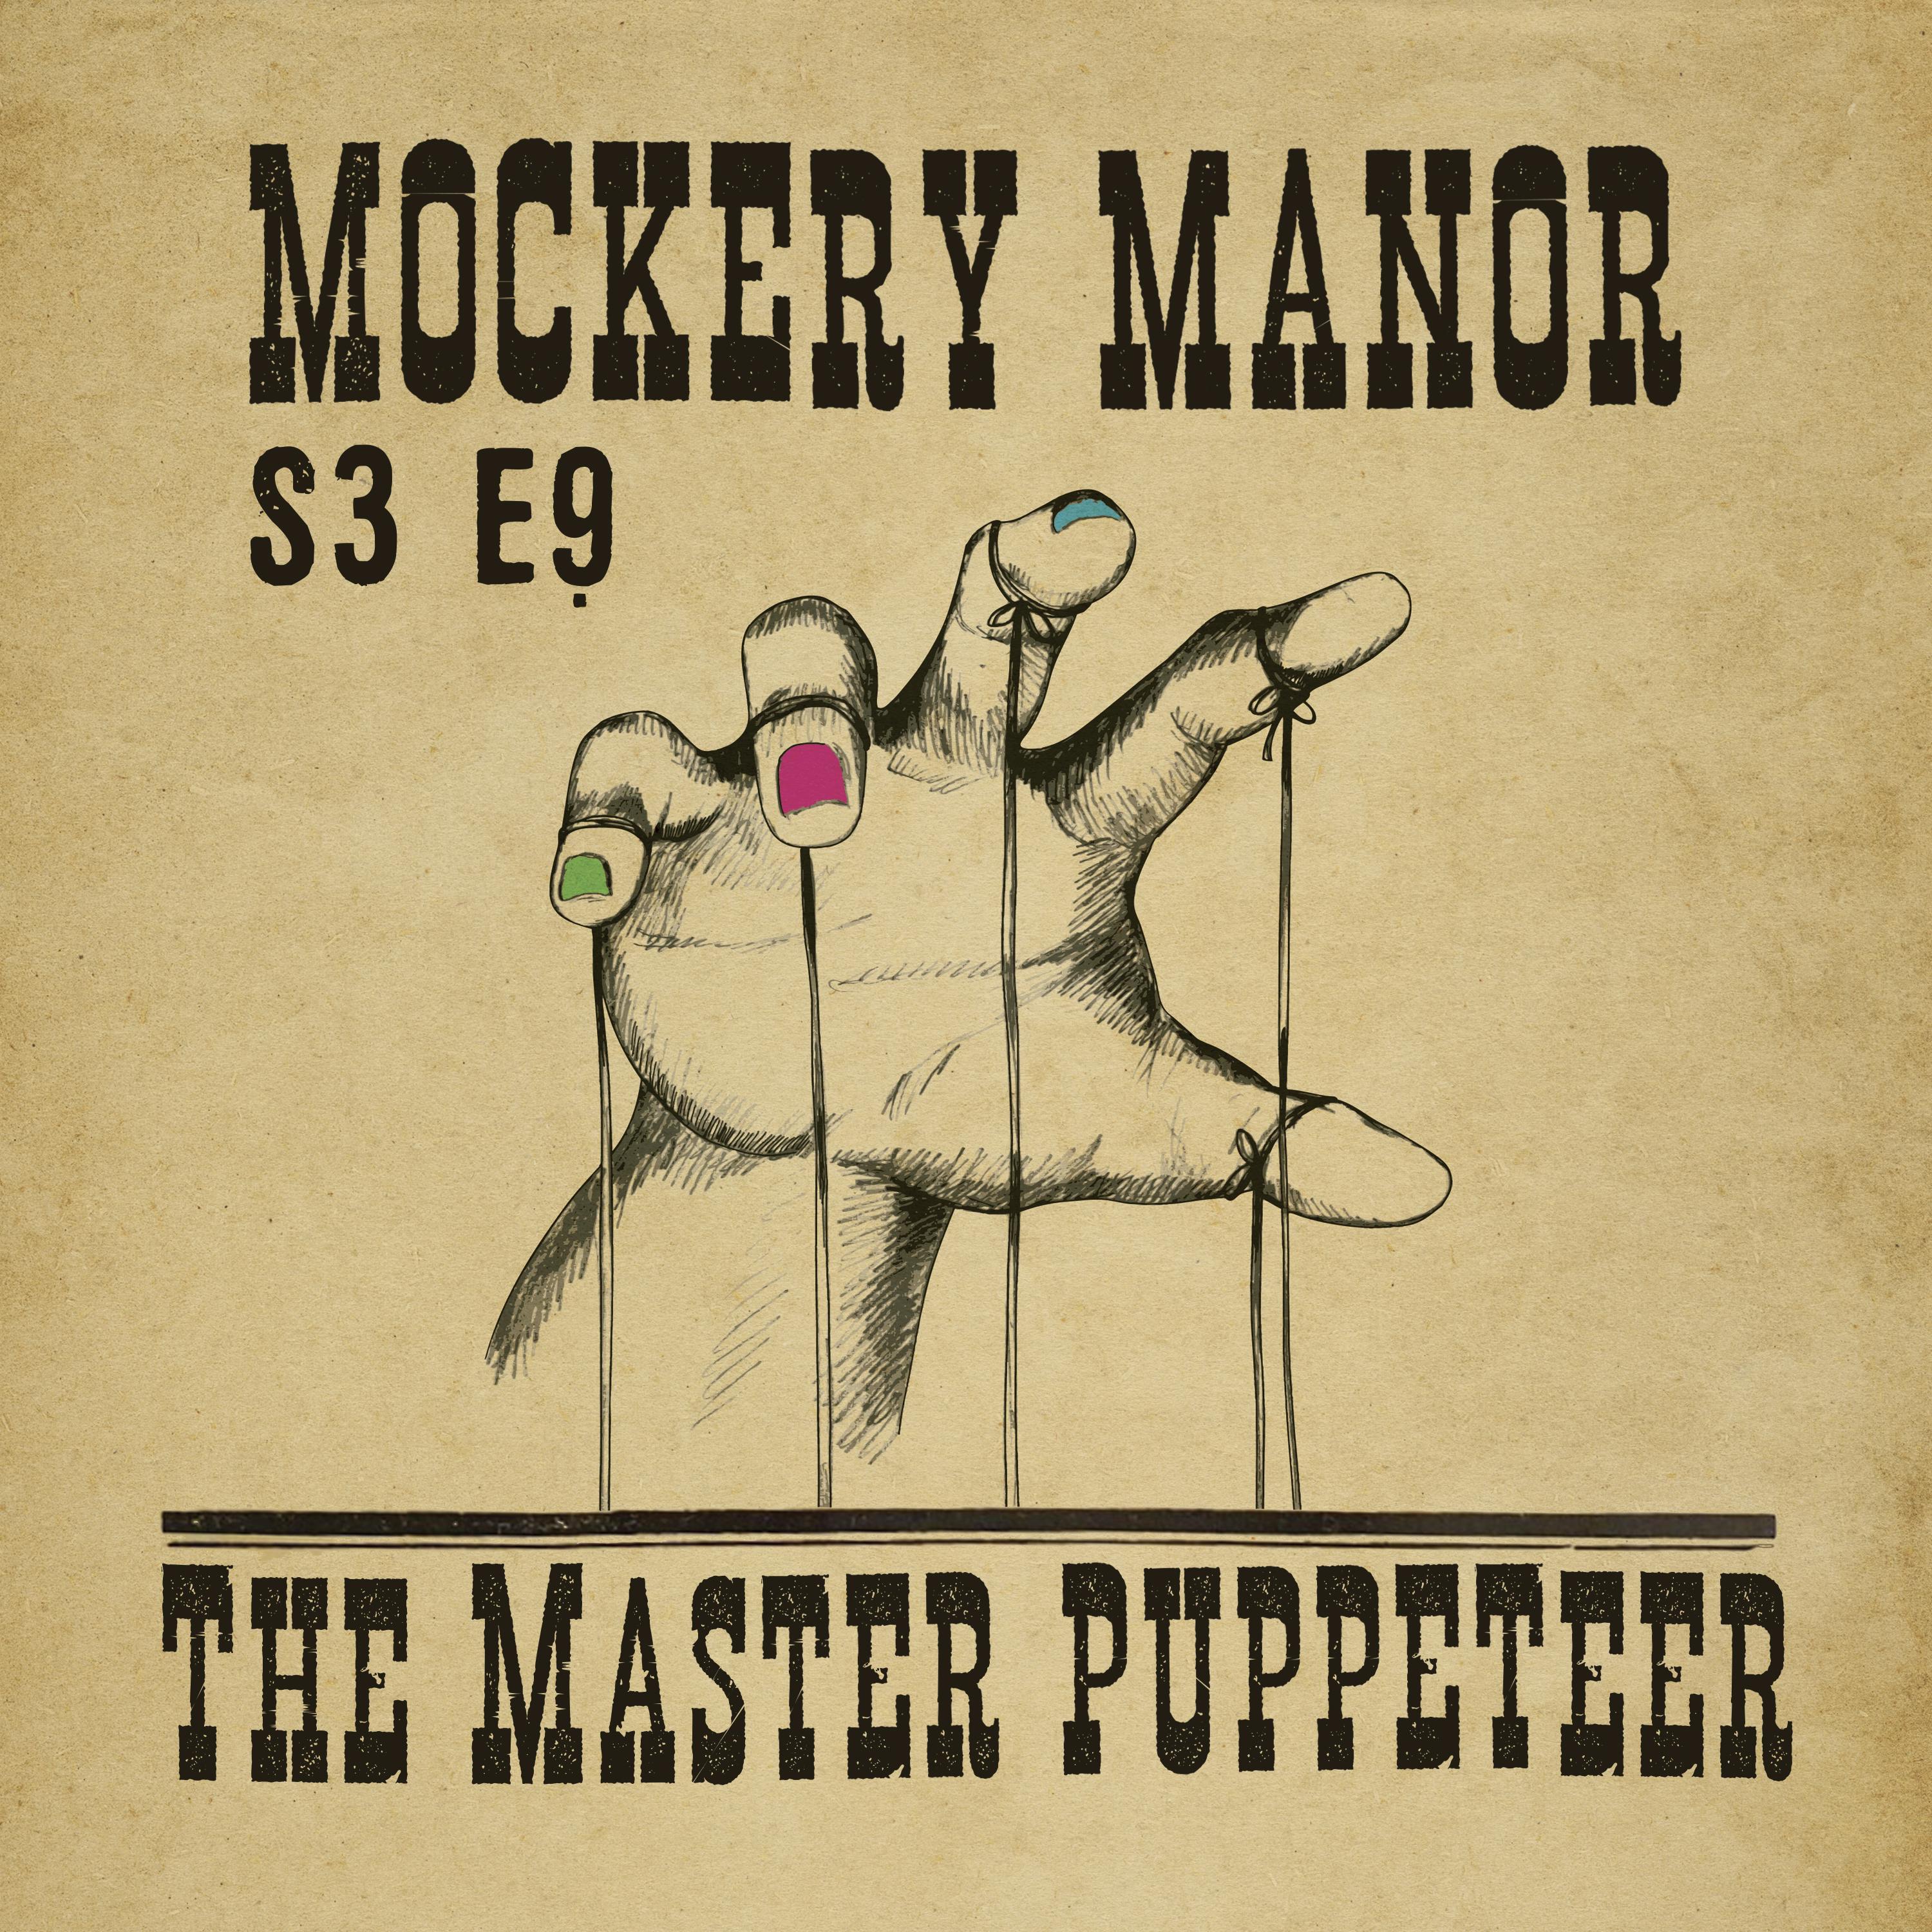 S3 E9 - The Master Puppeteer